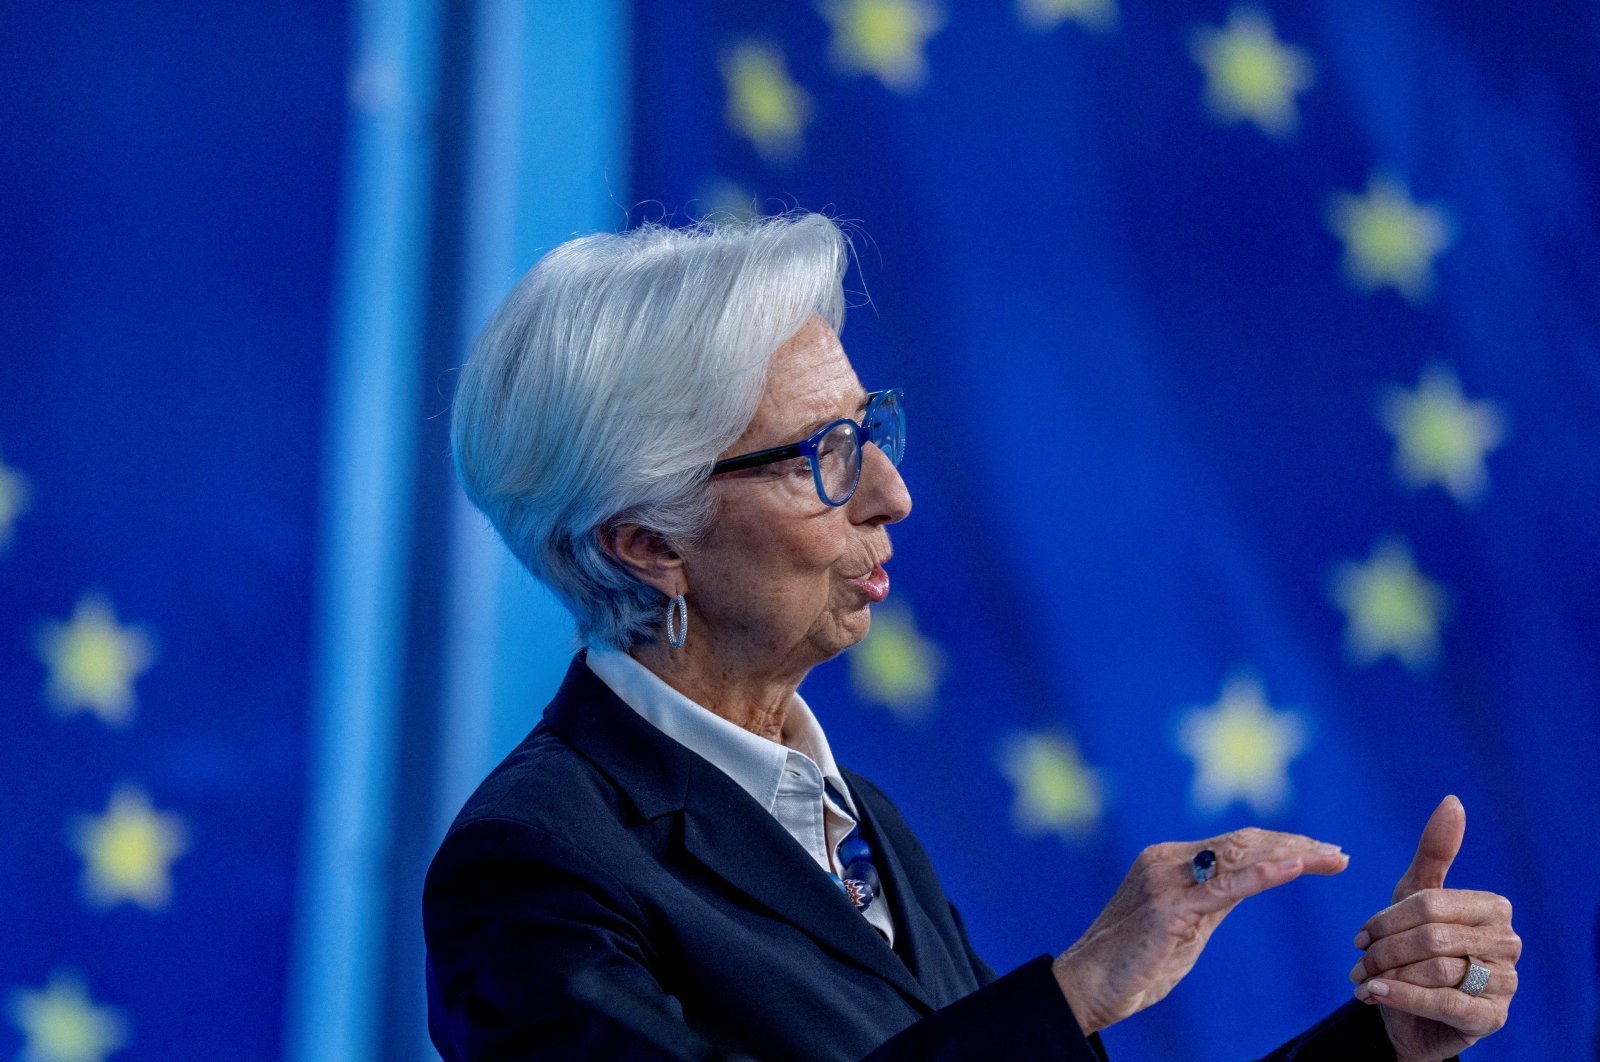 President of the European Central Bank, Christine Lagarde, speaks during a news conference following a meeting of the governing council in Frankfurt, Germany, Feb. 3, 2022. (Reuters Photo)